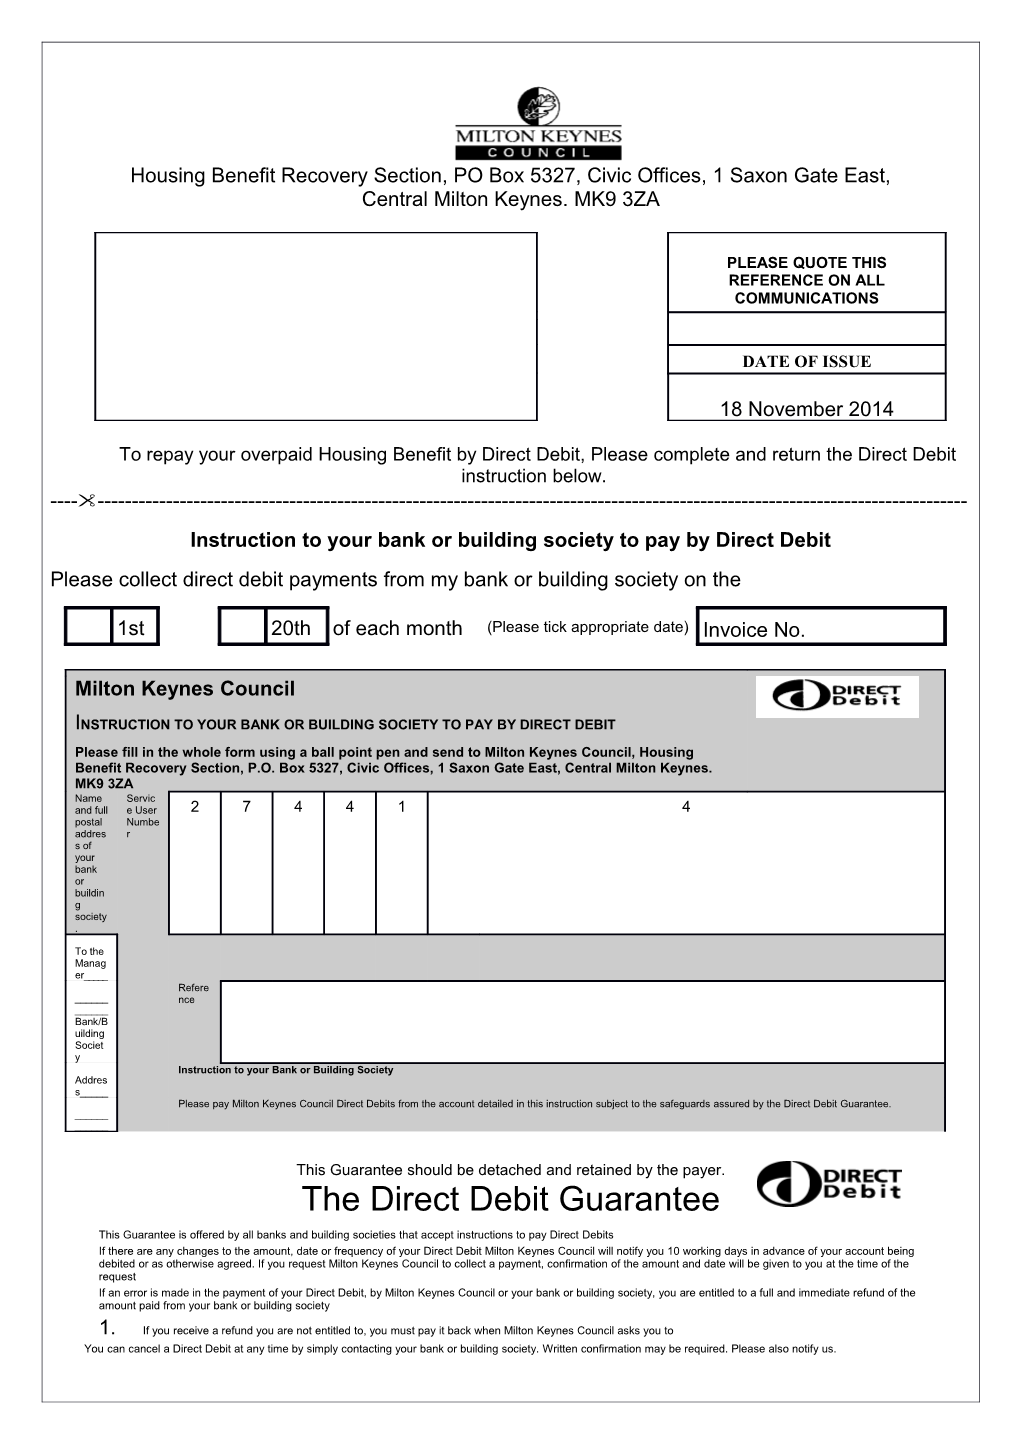 Instruction to Your Bank Or Building Society to Pay by Direct Debit